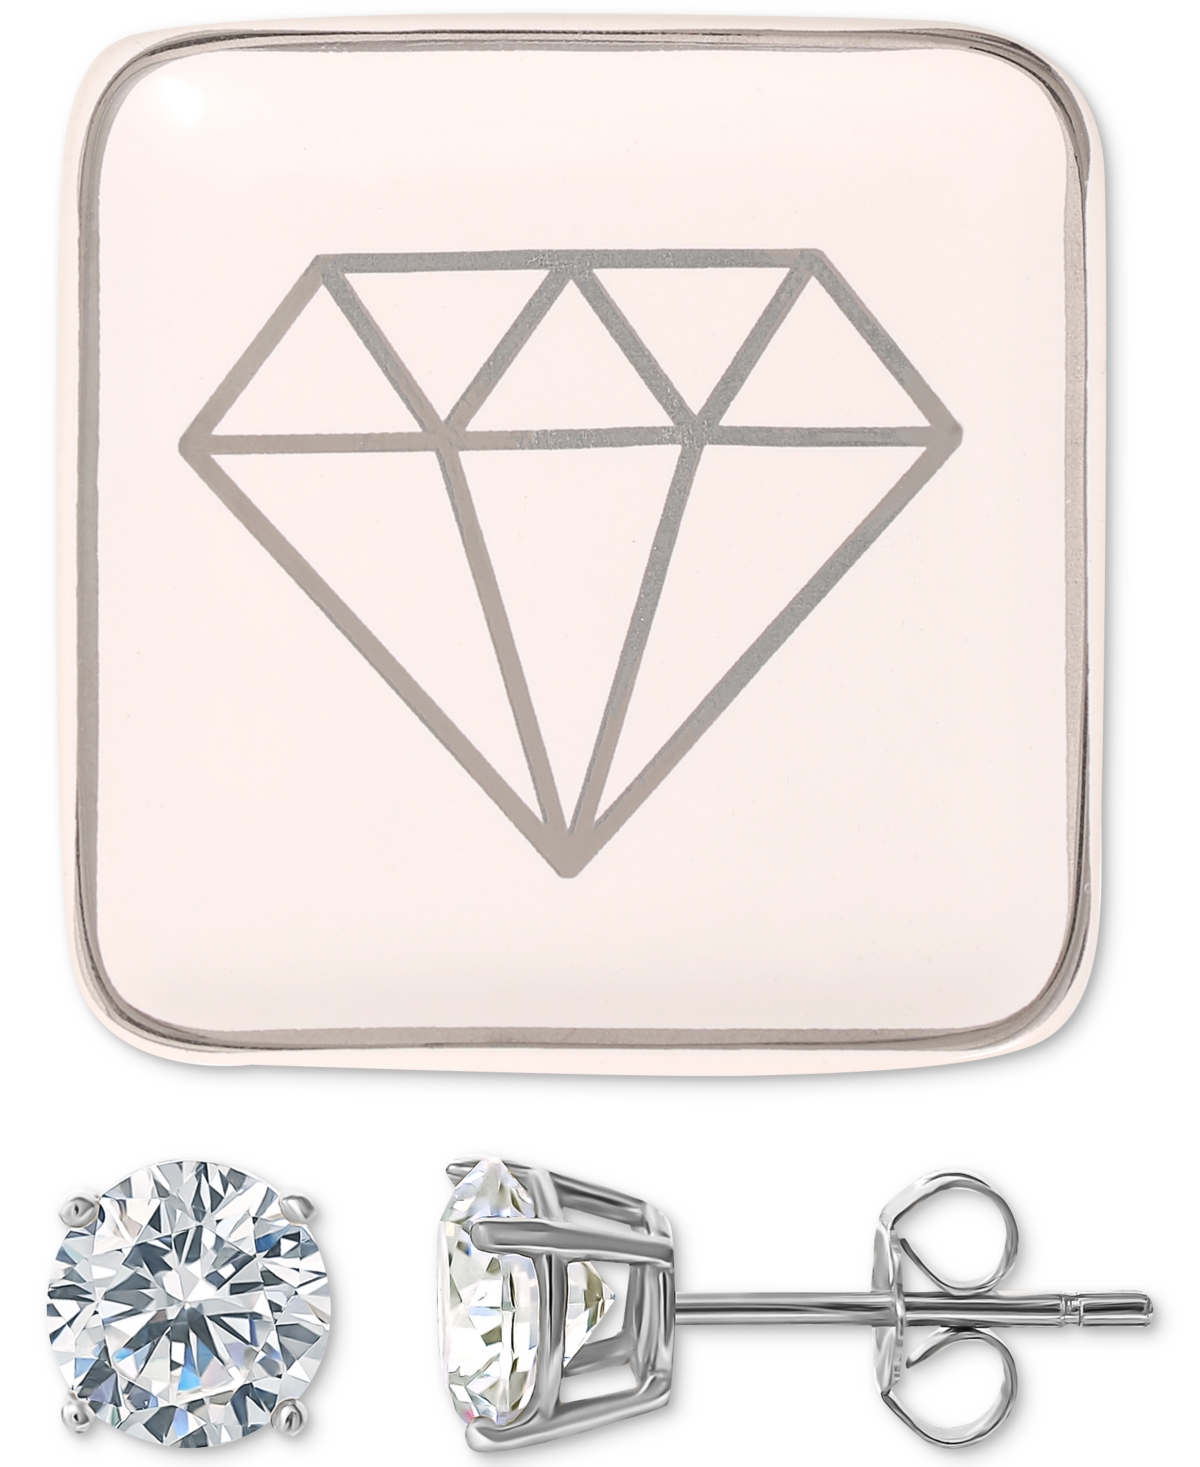 Cubic Zirconia Solitaire Stud Earrings & Ceramic Trinket Dish, Created for Macy's - Sterling Silver